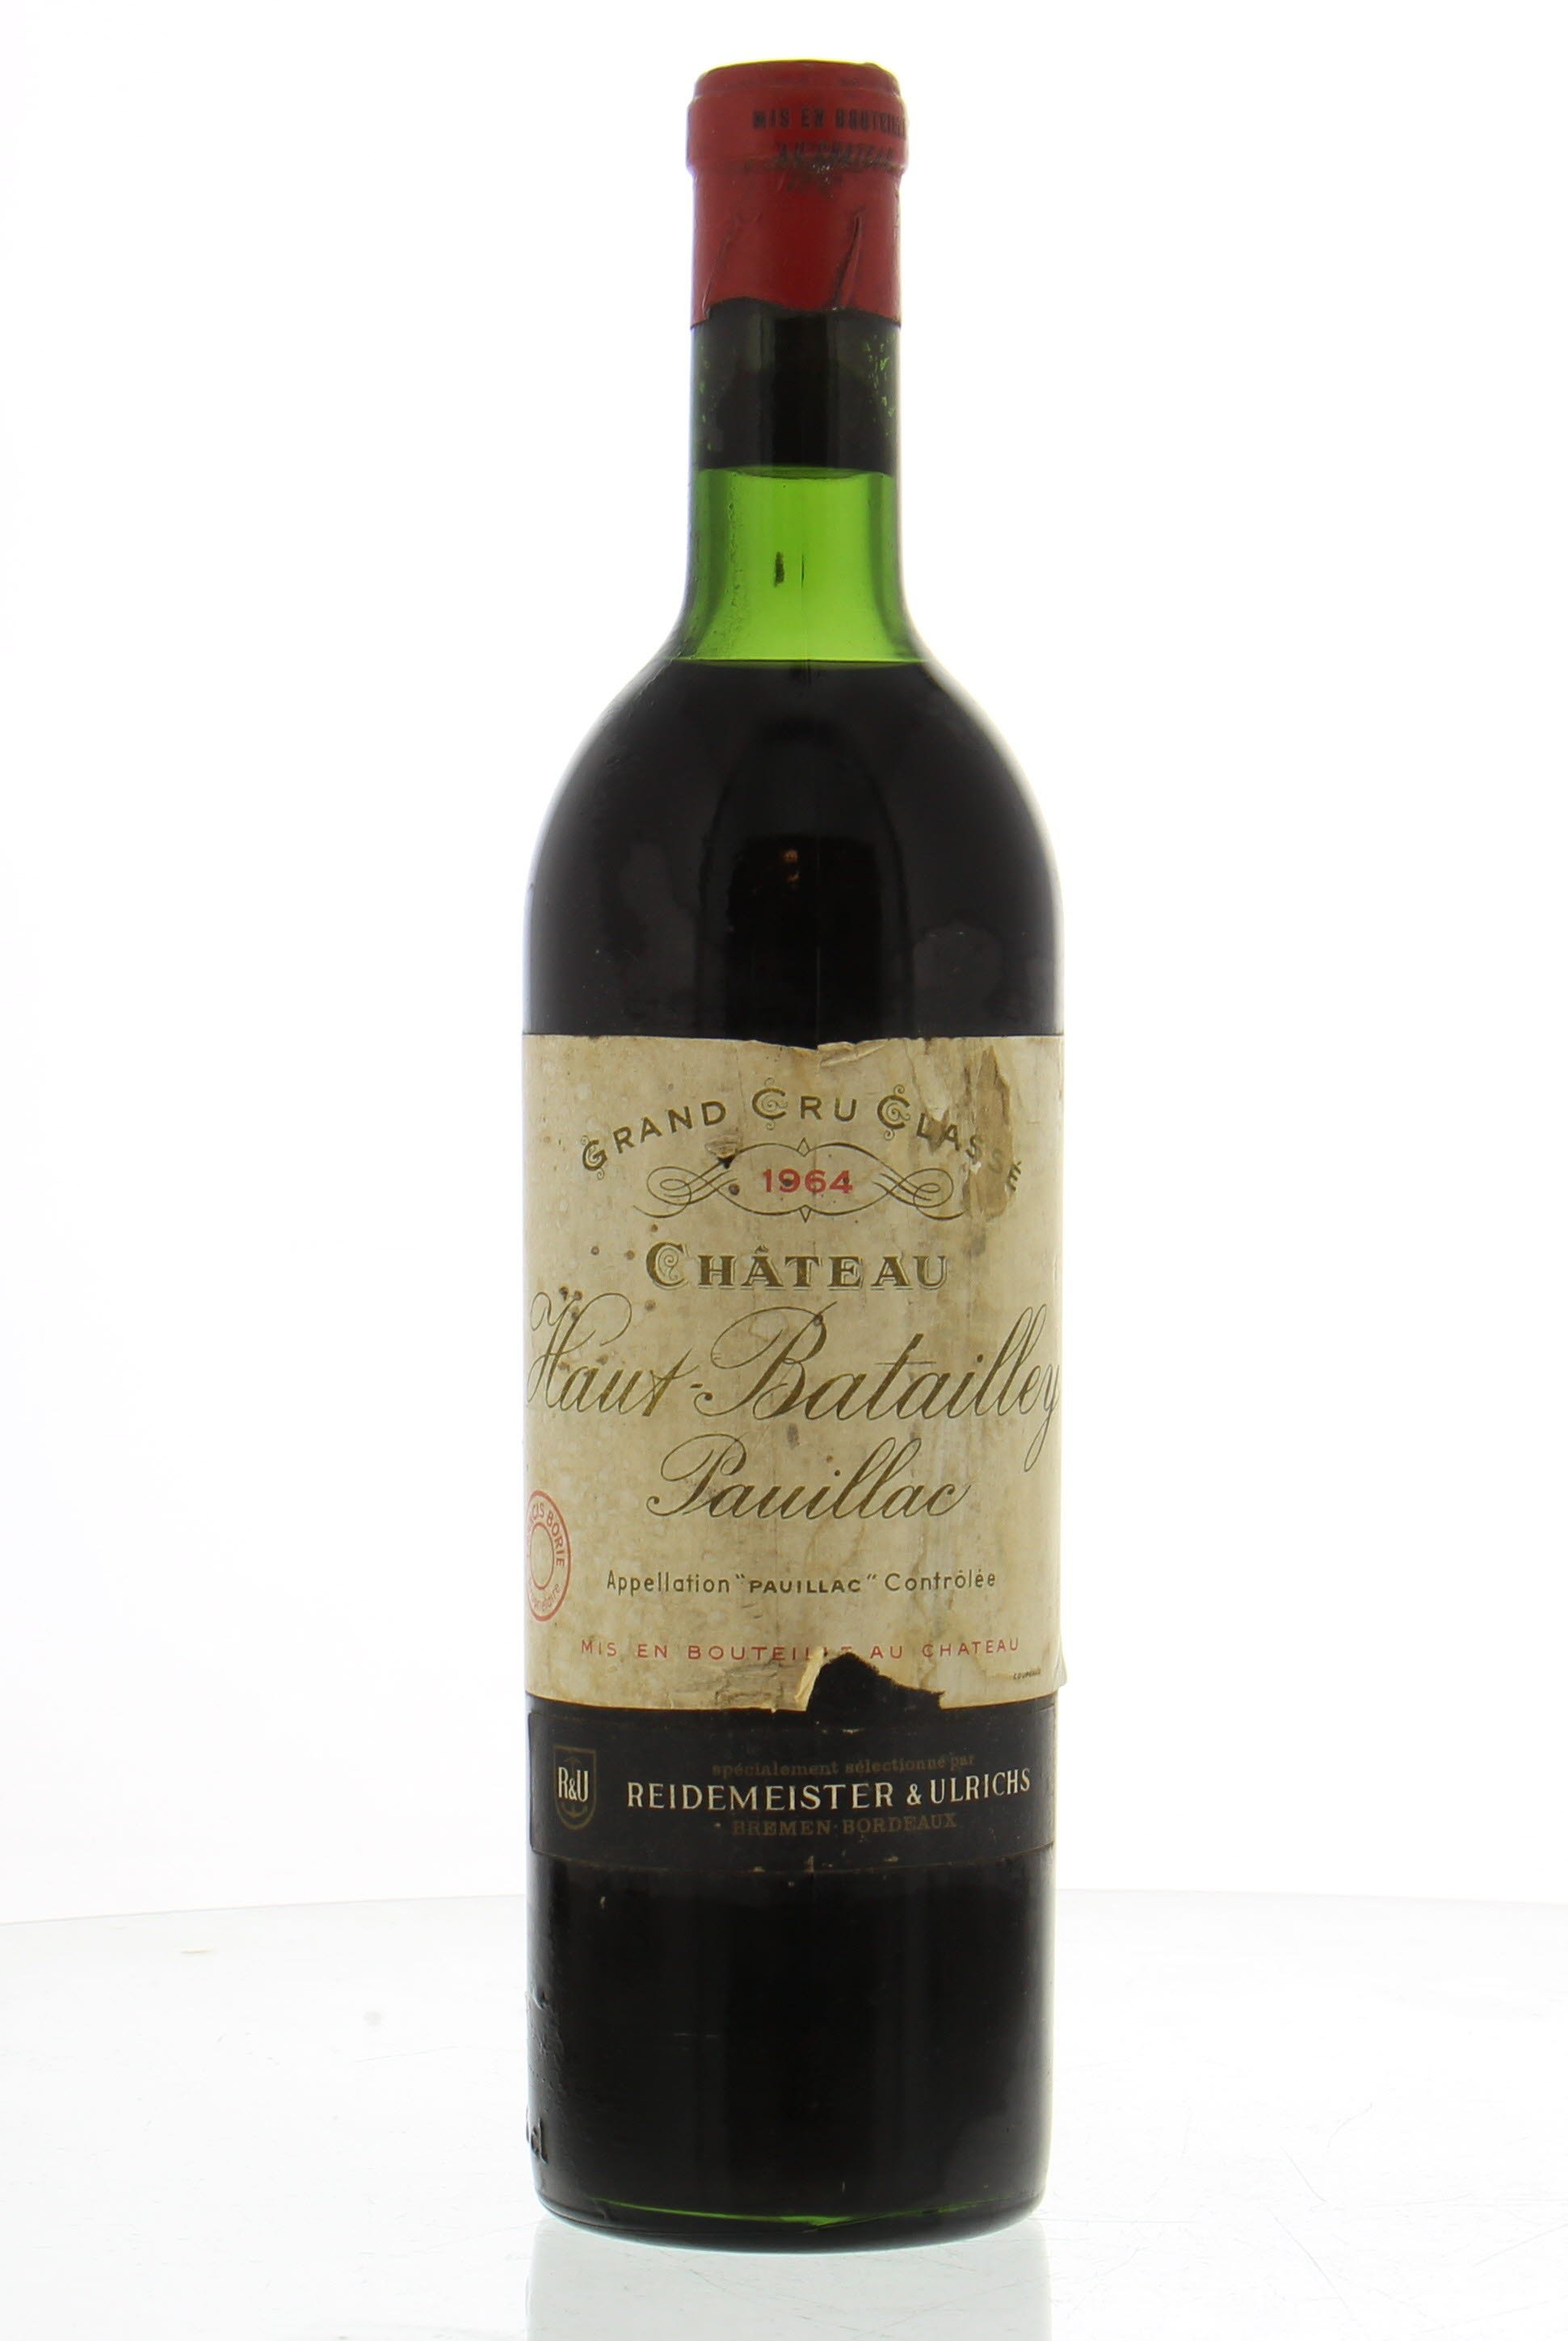 Chateau Batailley - Chateau Batailley 1964 Top Shoulder